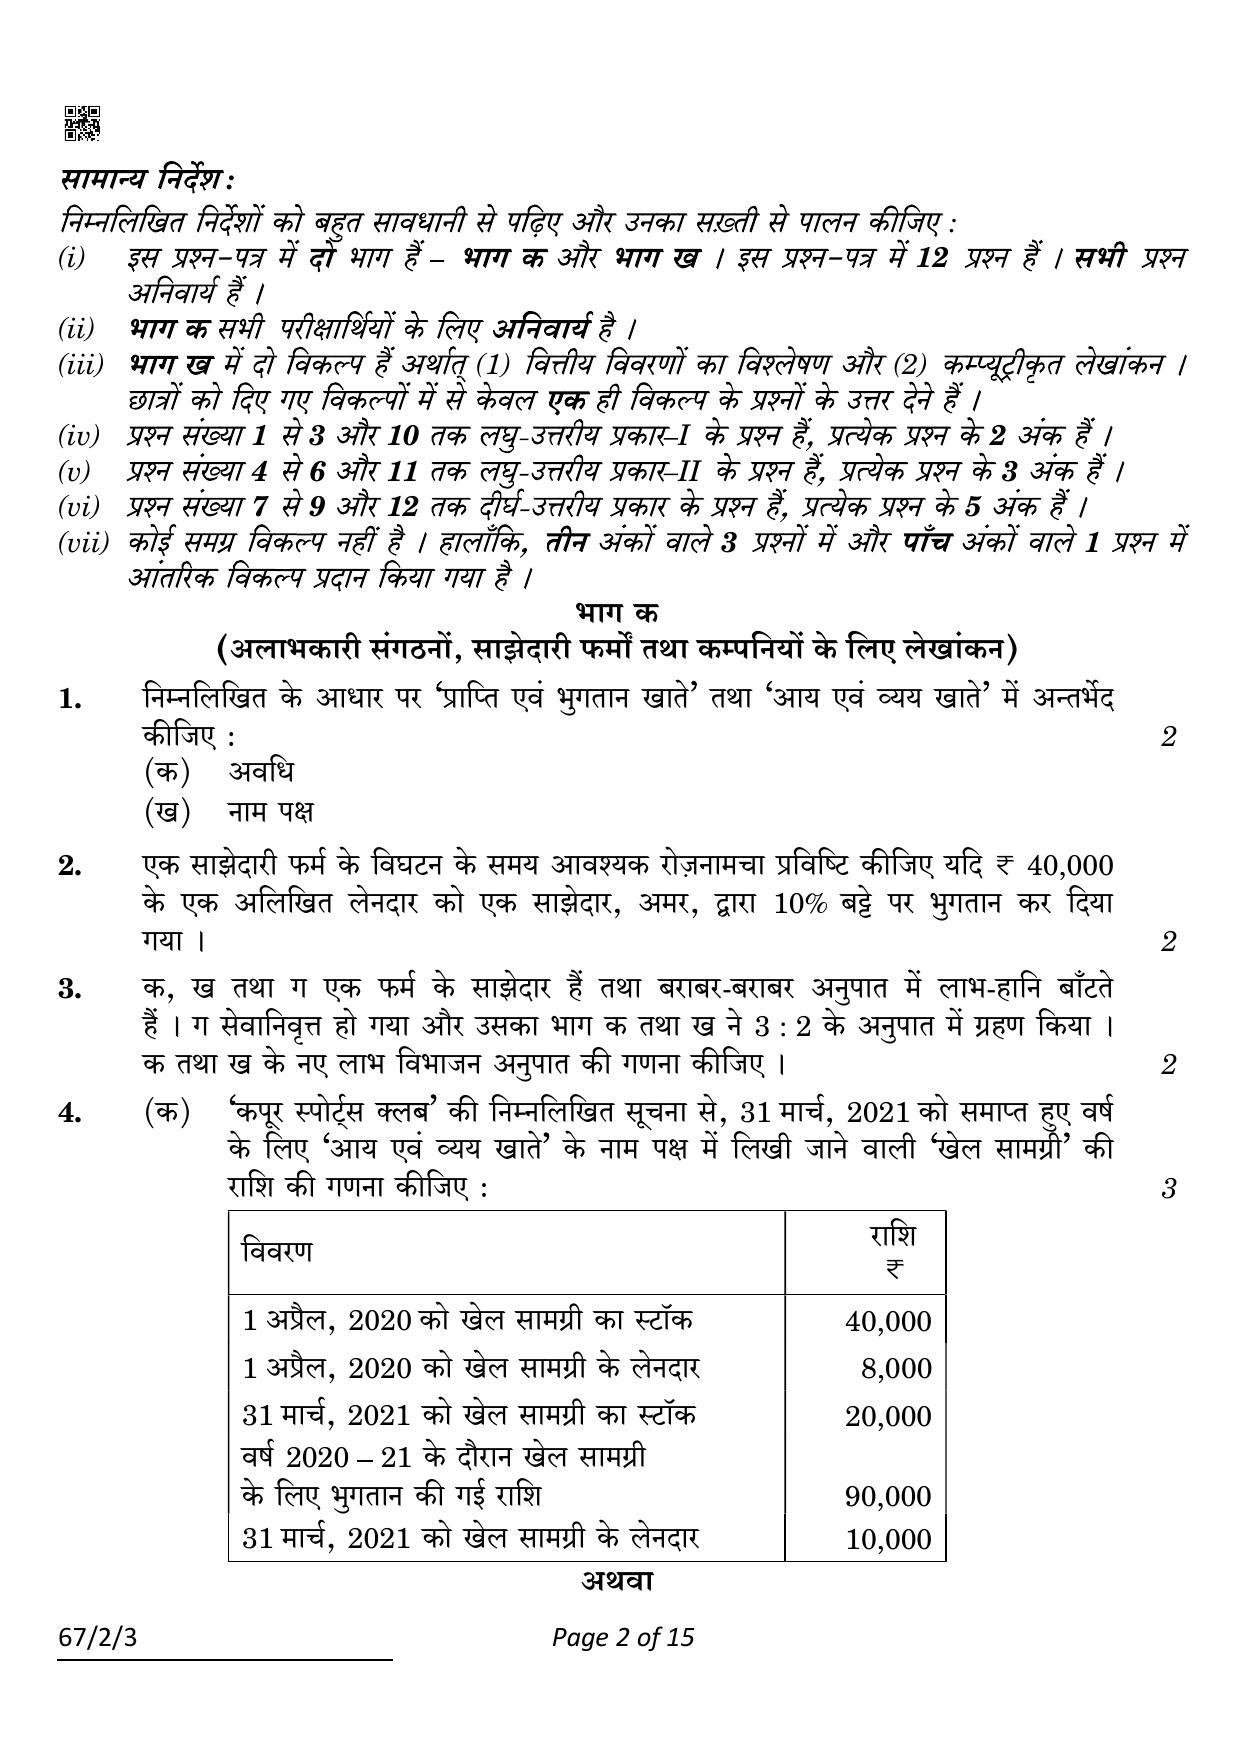 CBSE Class 12 67-2-3 Accountancy 2022 Question Paper - Page 2